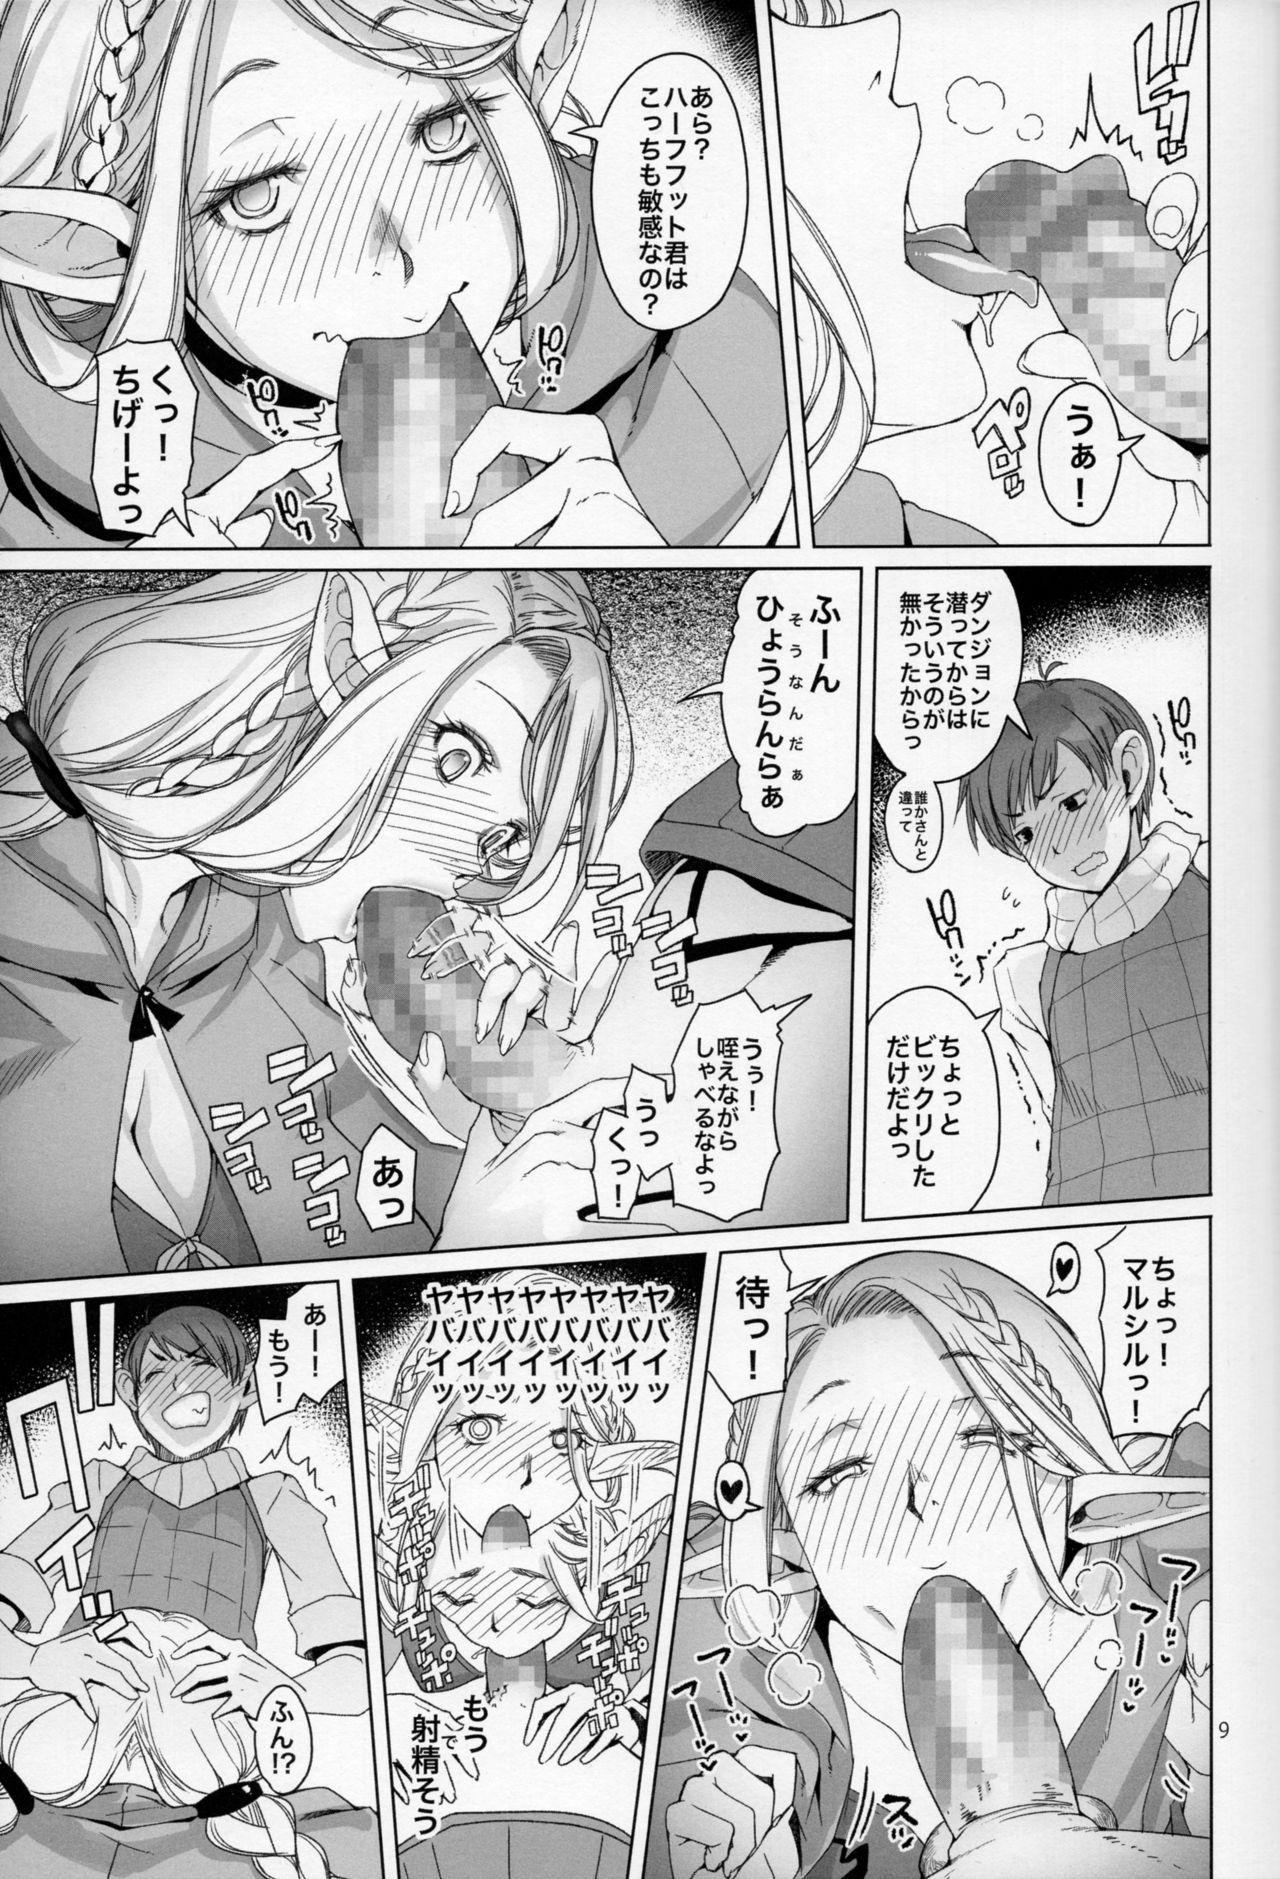 Nut Marchil Meshi - Dungeon meshi Yoga - Page 8